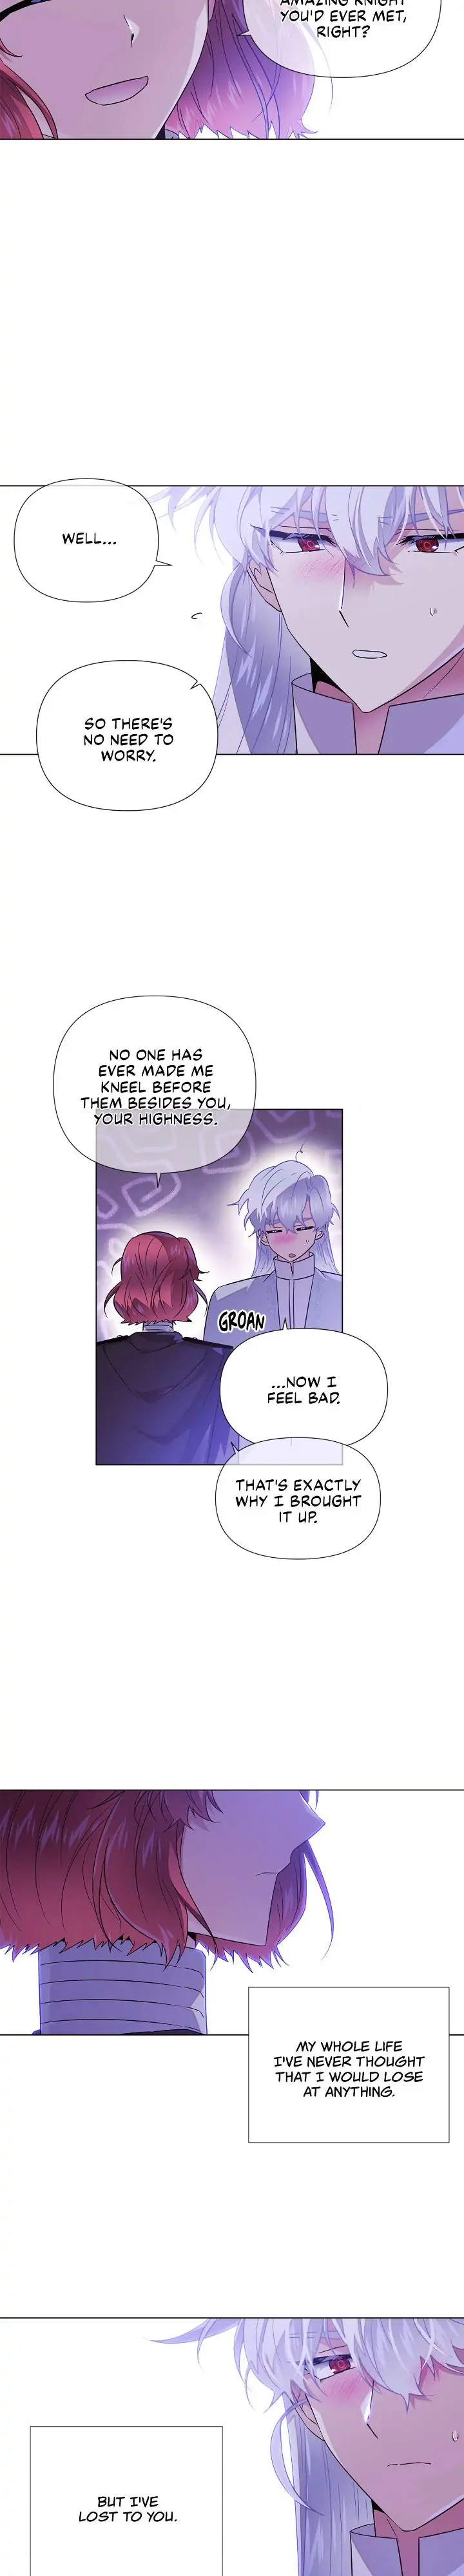 The Villain Discovered My Identity - Chapter 120 Page 20